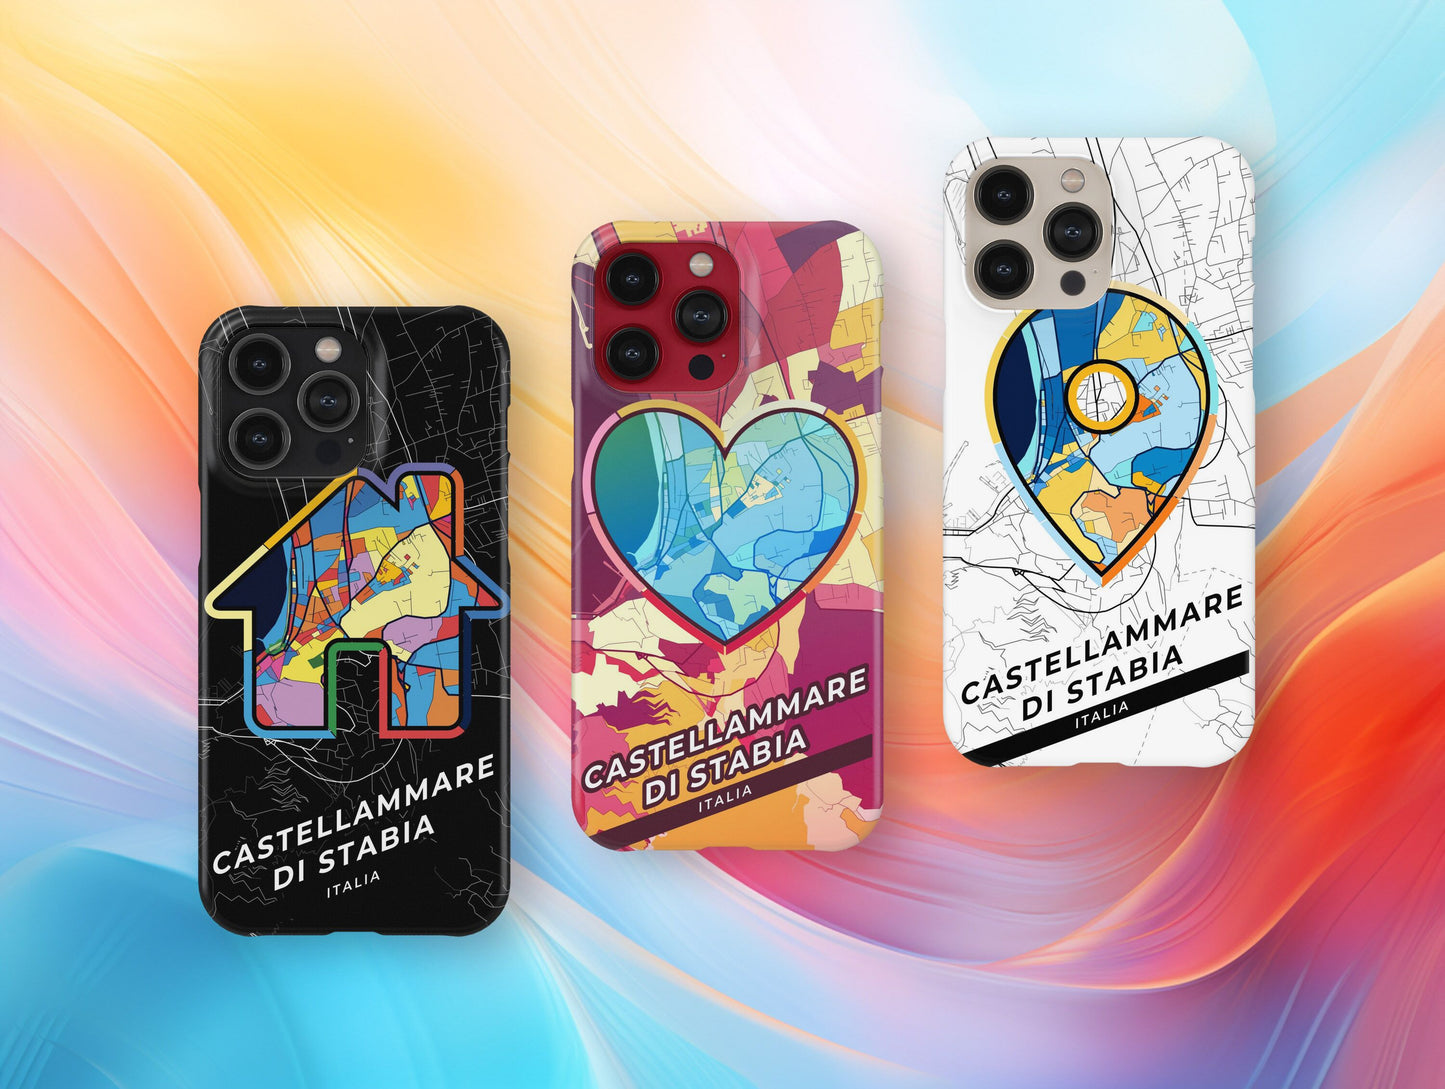 Castellammare Di Stabia Italy slim phone case with colorful icon. Birthday, wedding or housewarming gift. Couple match cases.